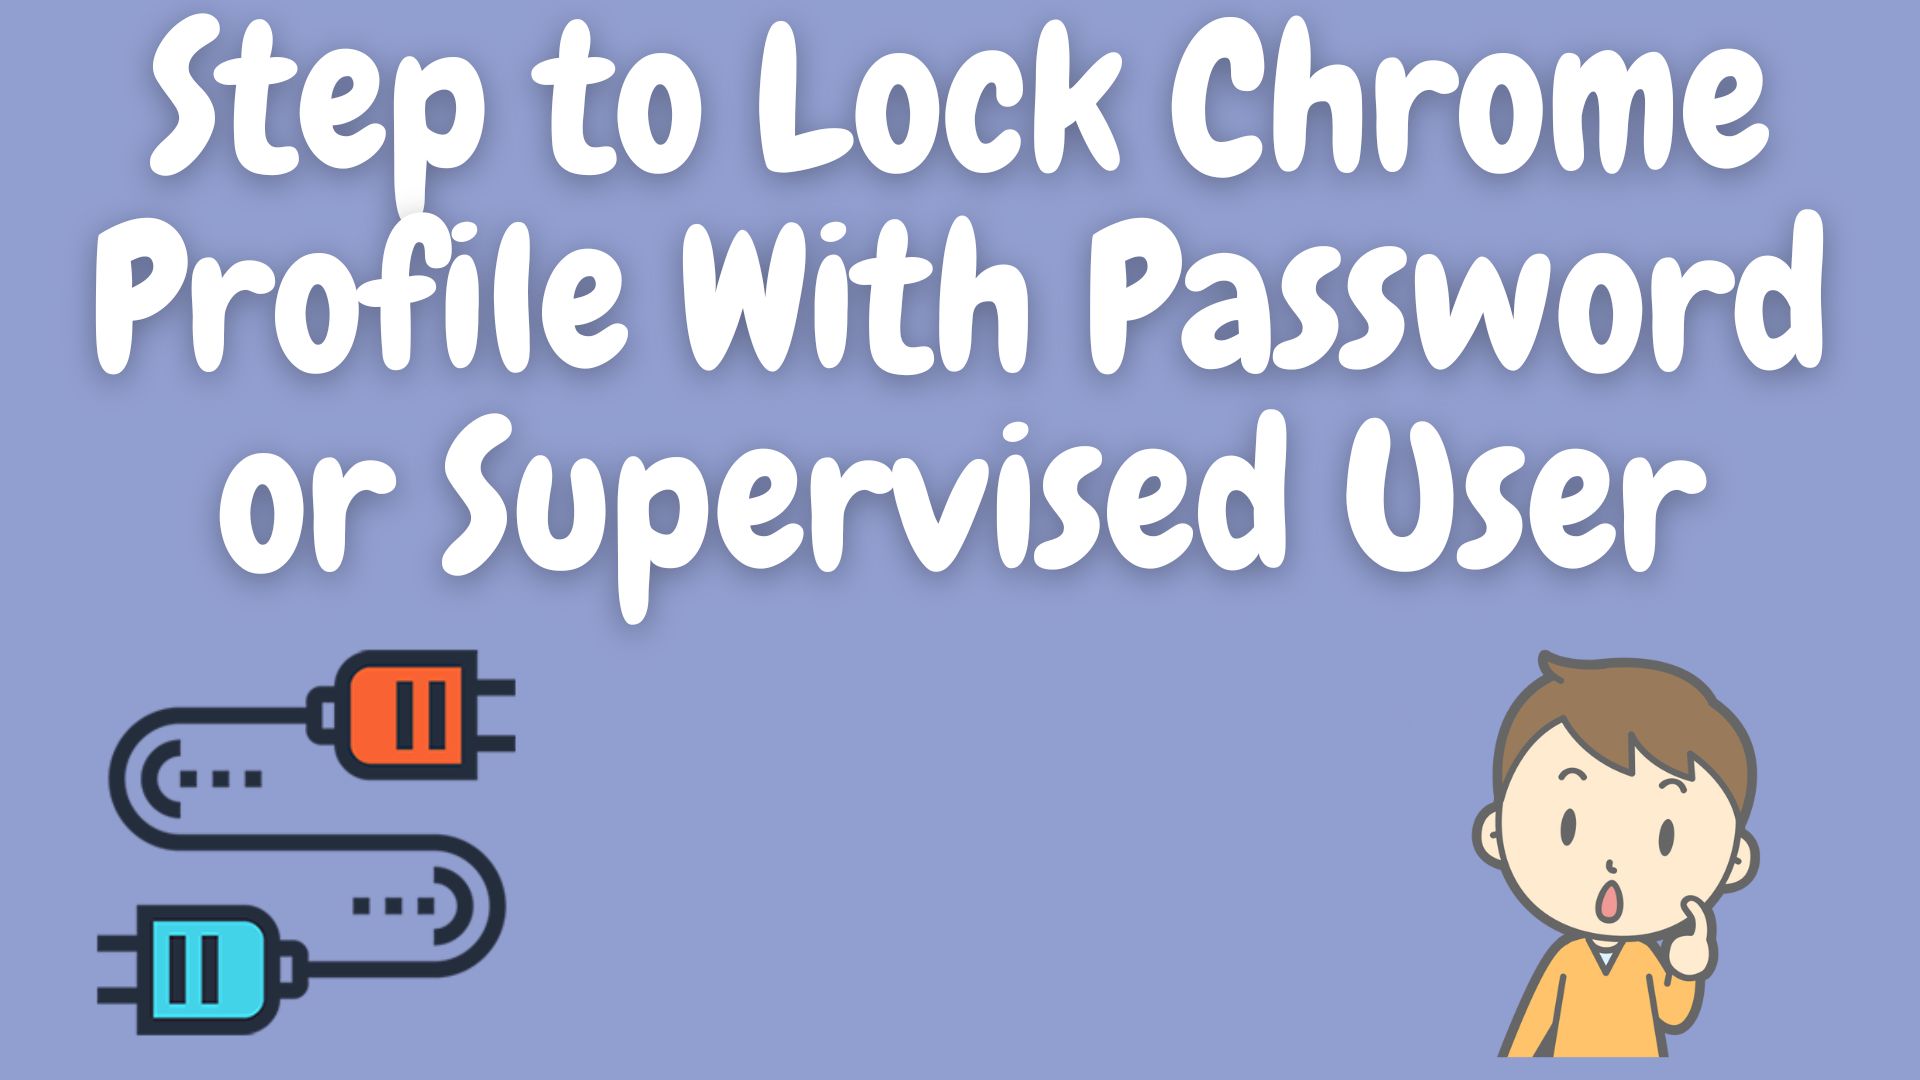 Step to Lock Chrome Profile With Password or Supervised User